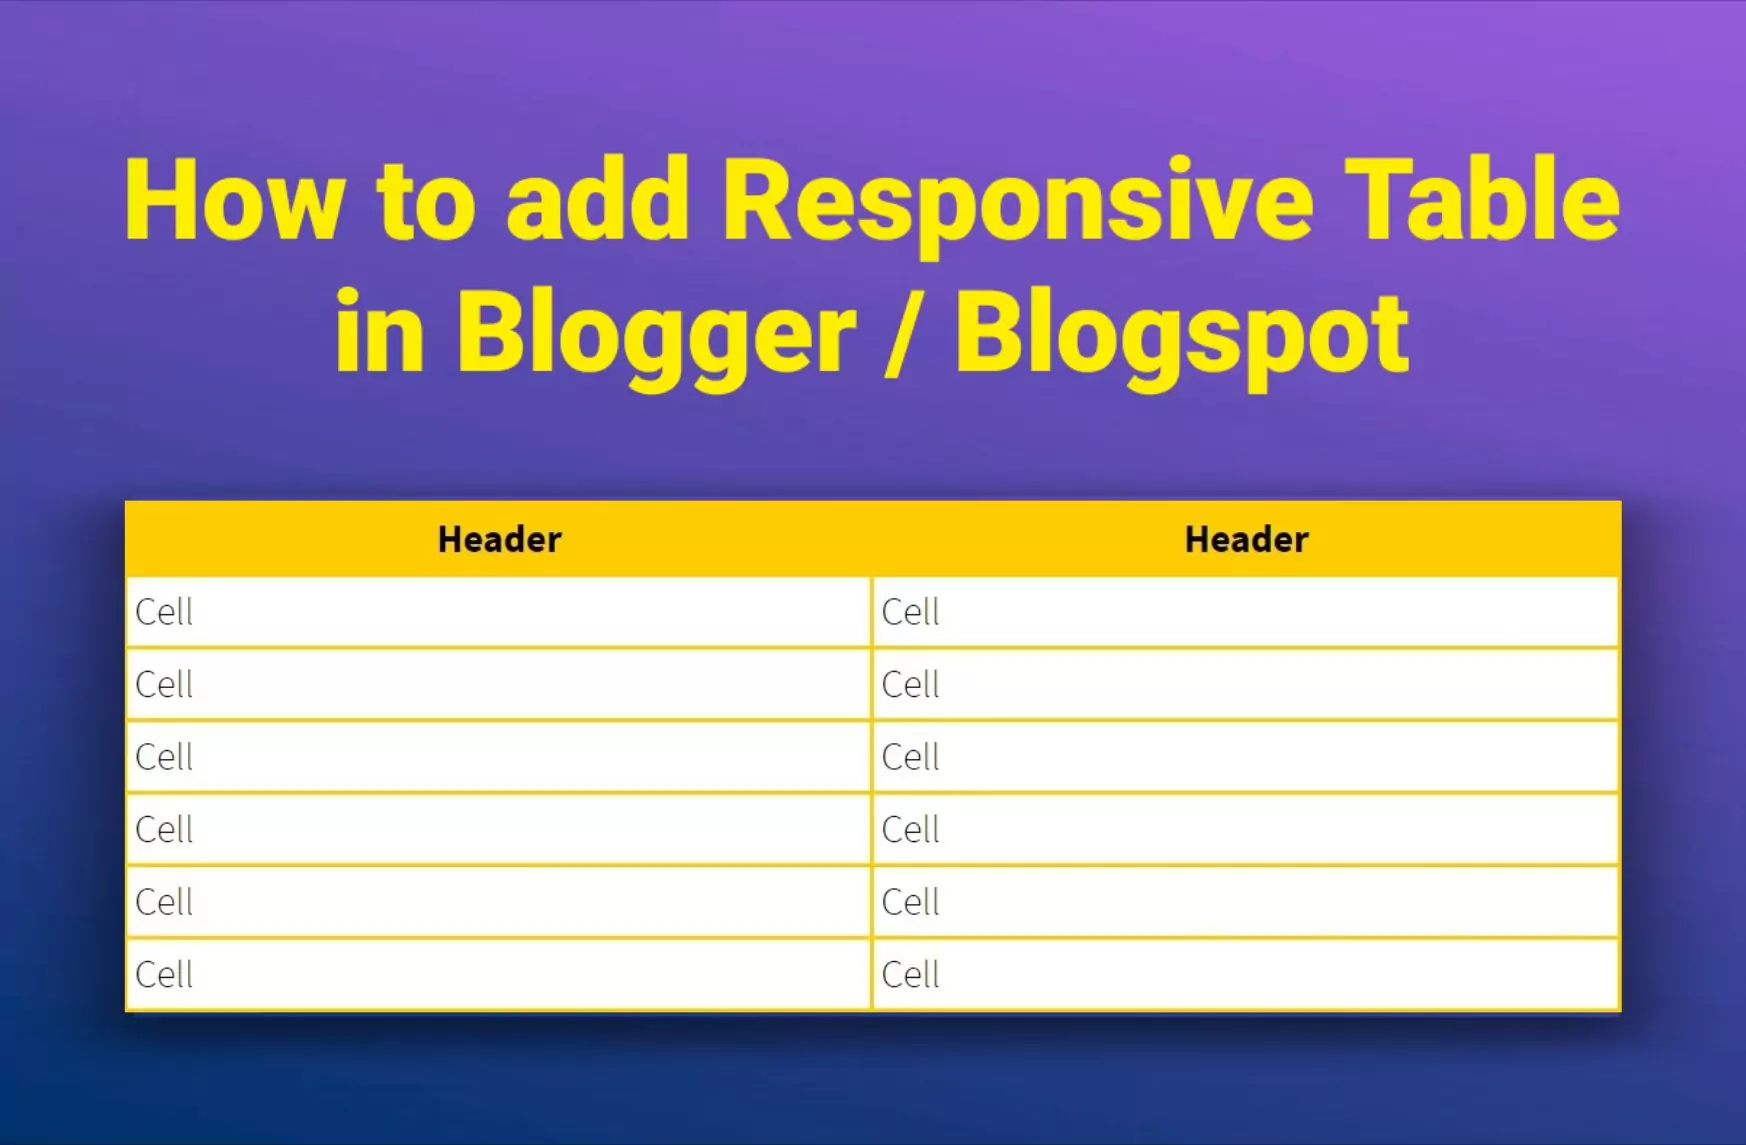 Add Responsive Table in Blogger